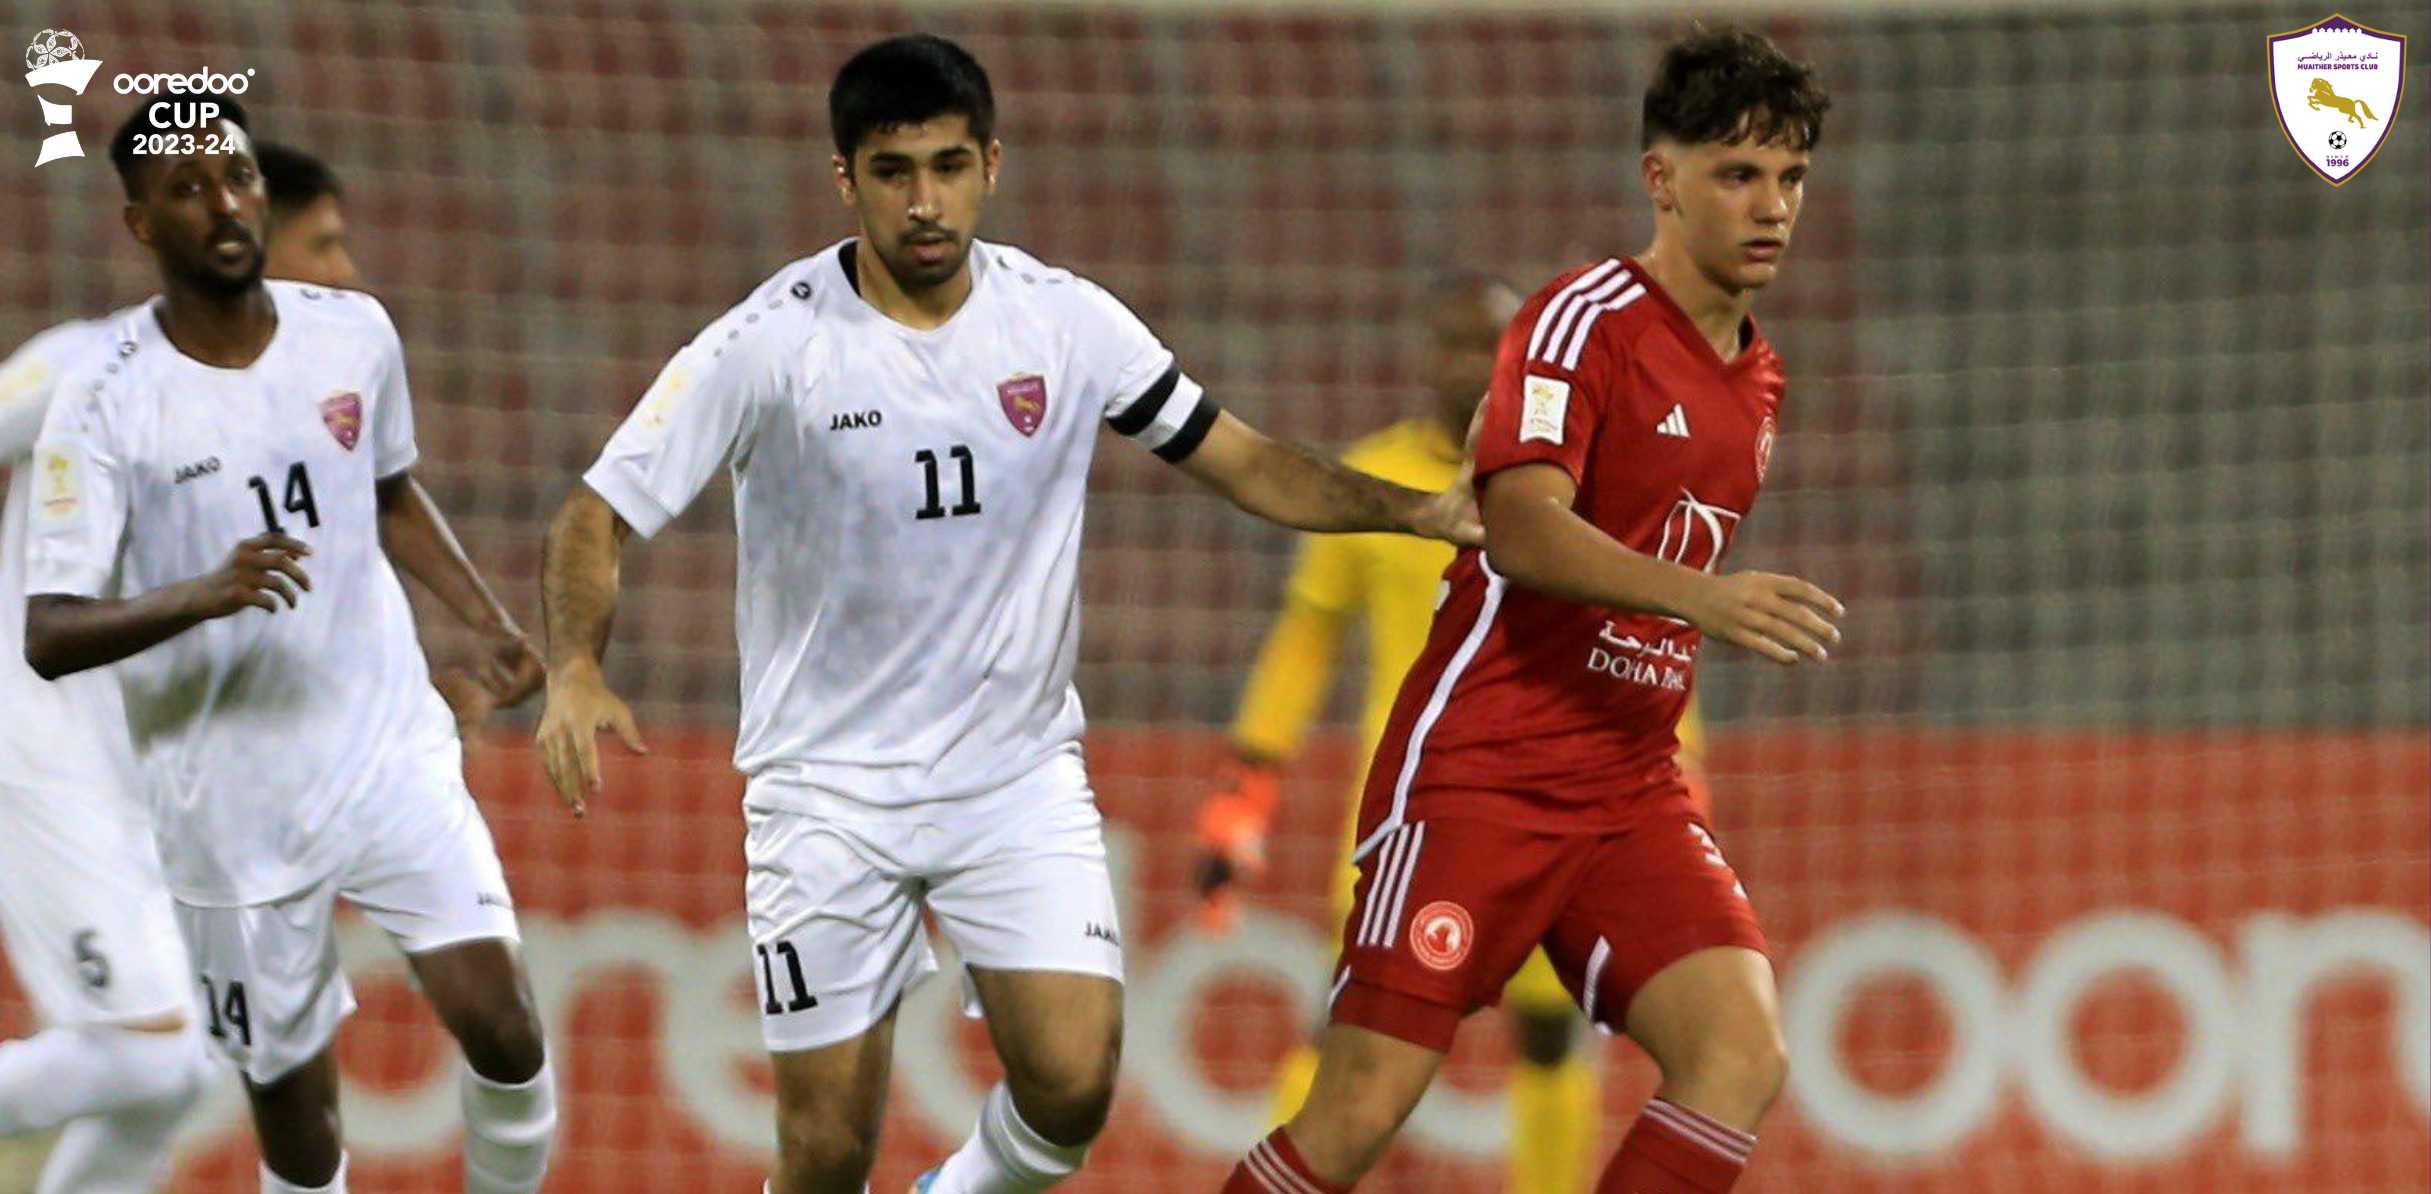 At the opening of the Ooredoo Cup tournament Muaither loses to Al Arabi